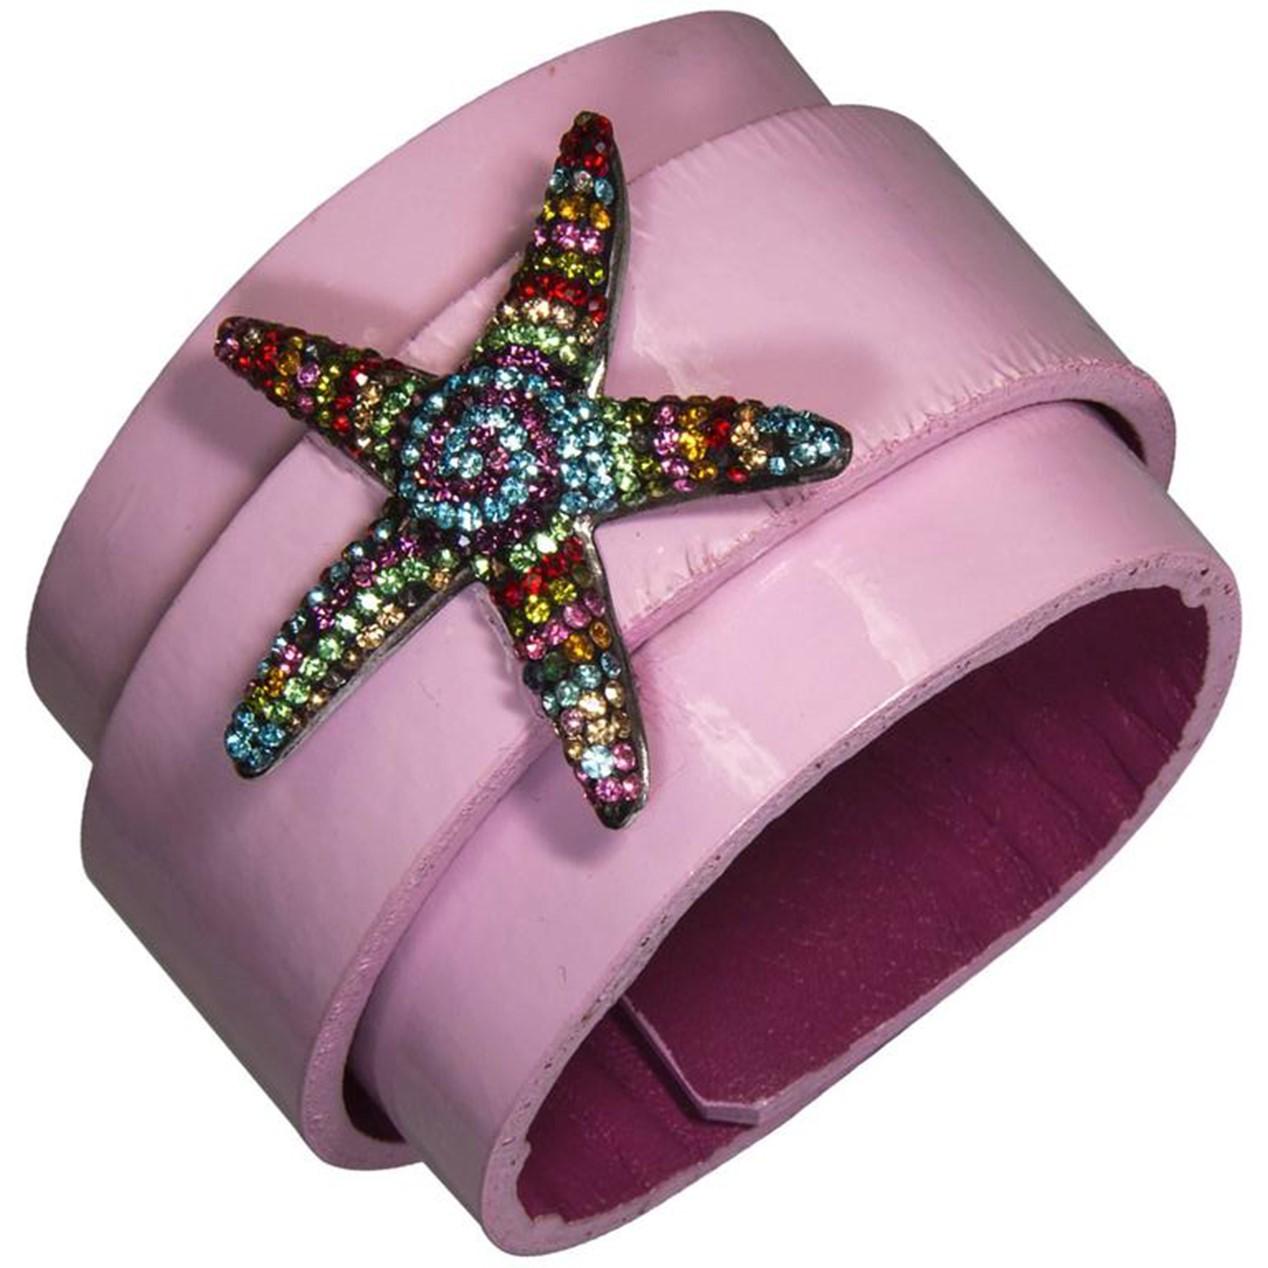 Beautiful Starfish Sterling Silver encrusted with multi color CZ featured on a Pink Patent Leather Cuff Bracelet; adjustable, fits small to medium/large wrist comfortably. Add a little Magic and your own Unique Style to the everyday with this